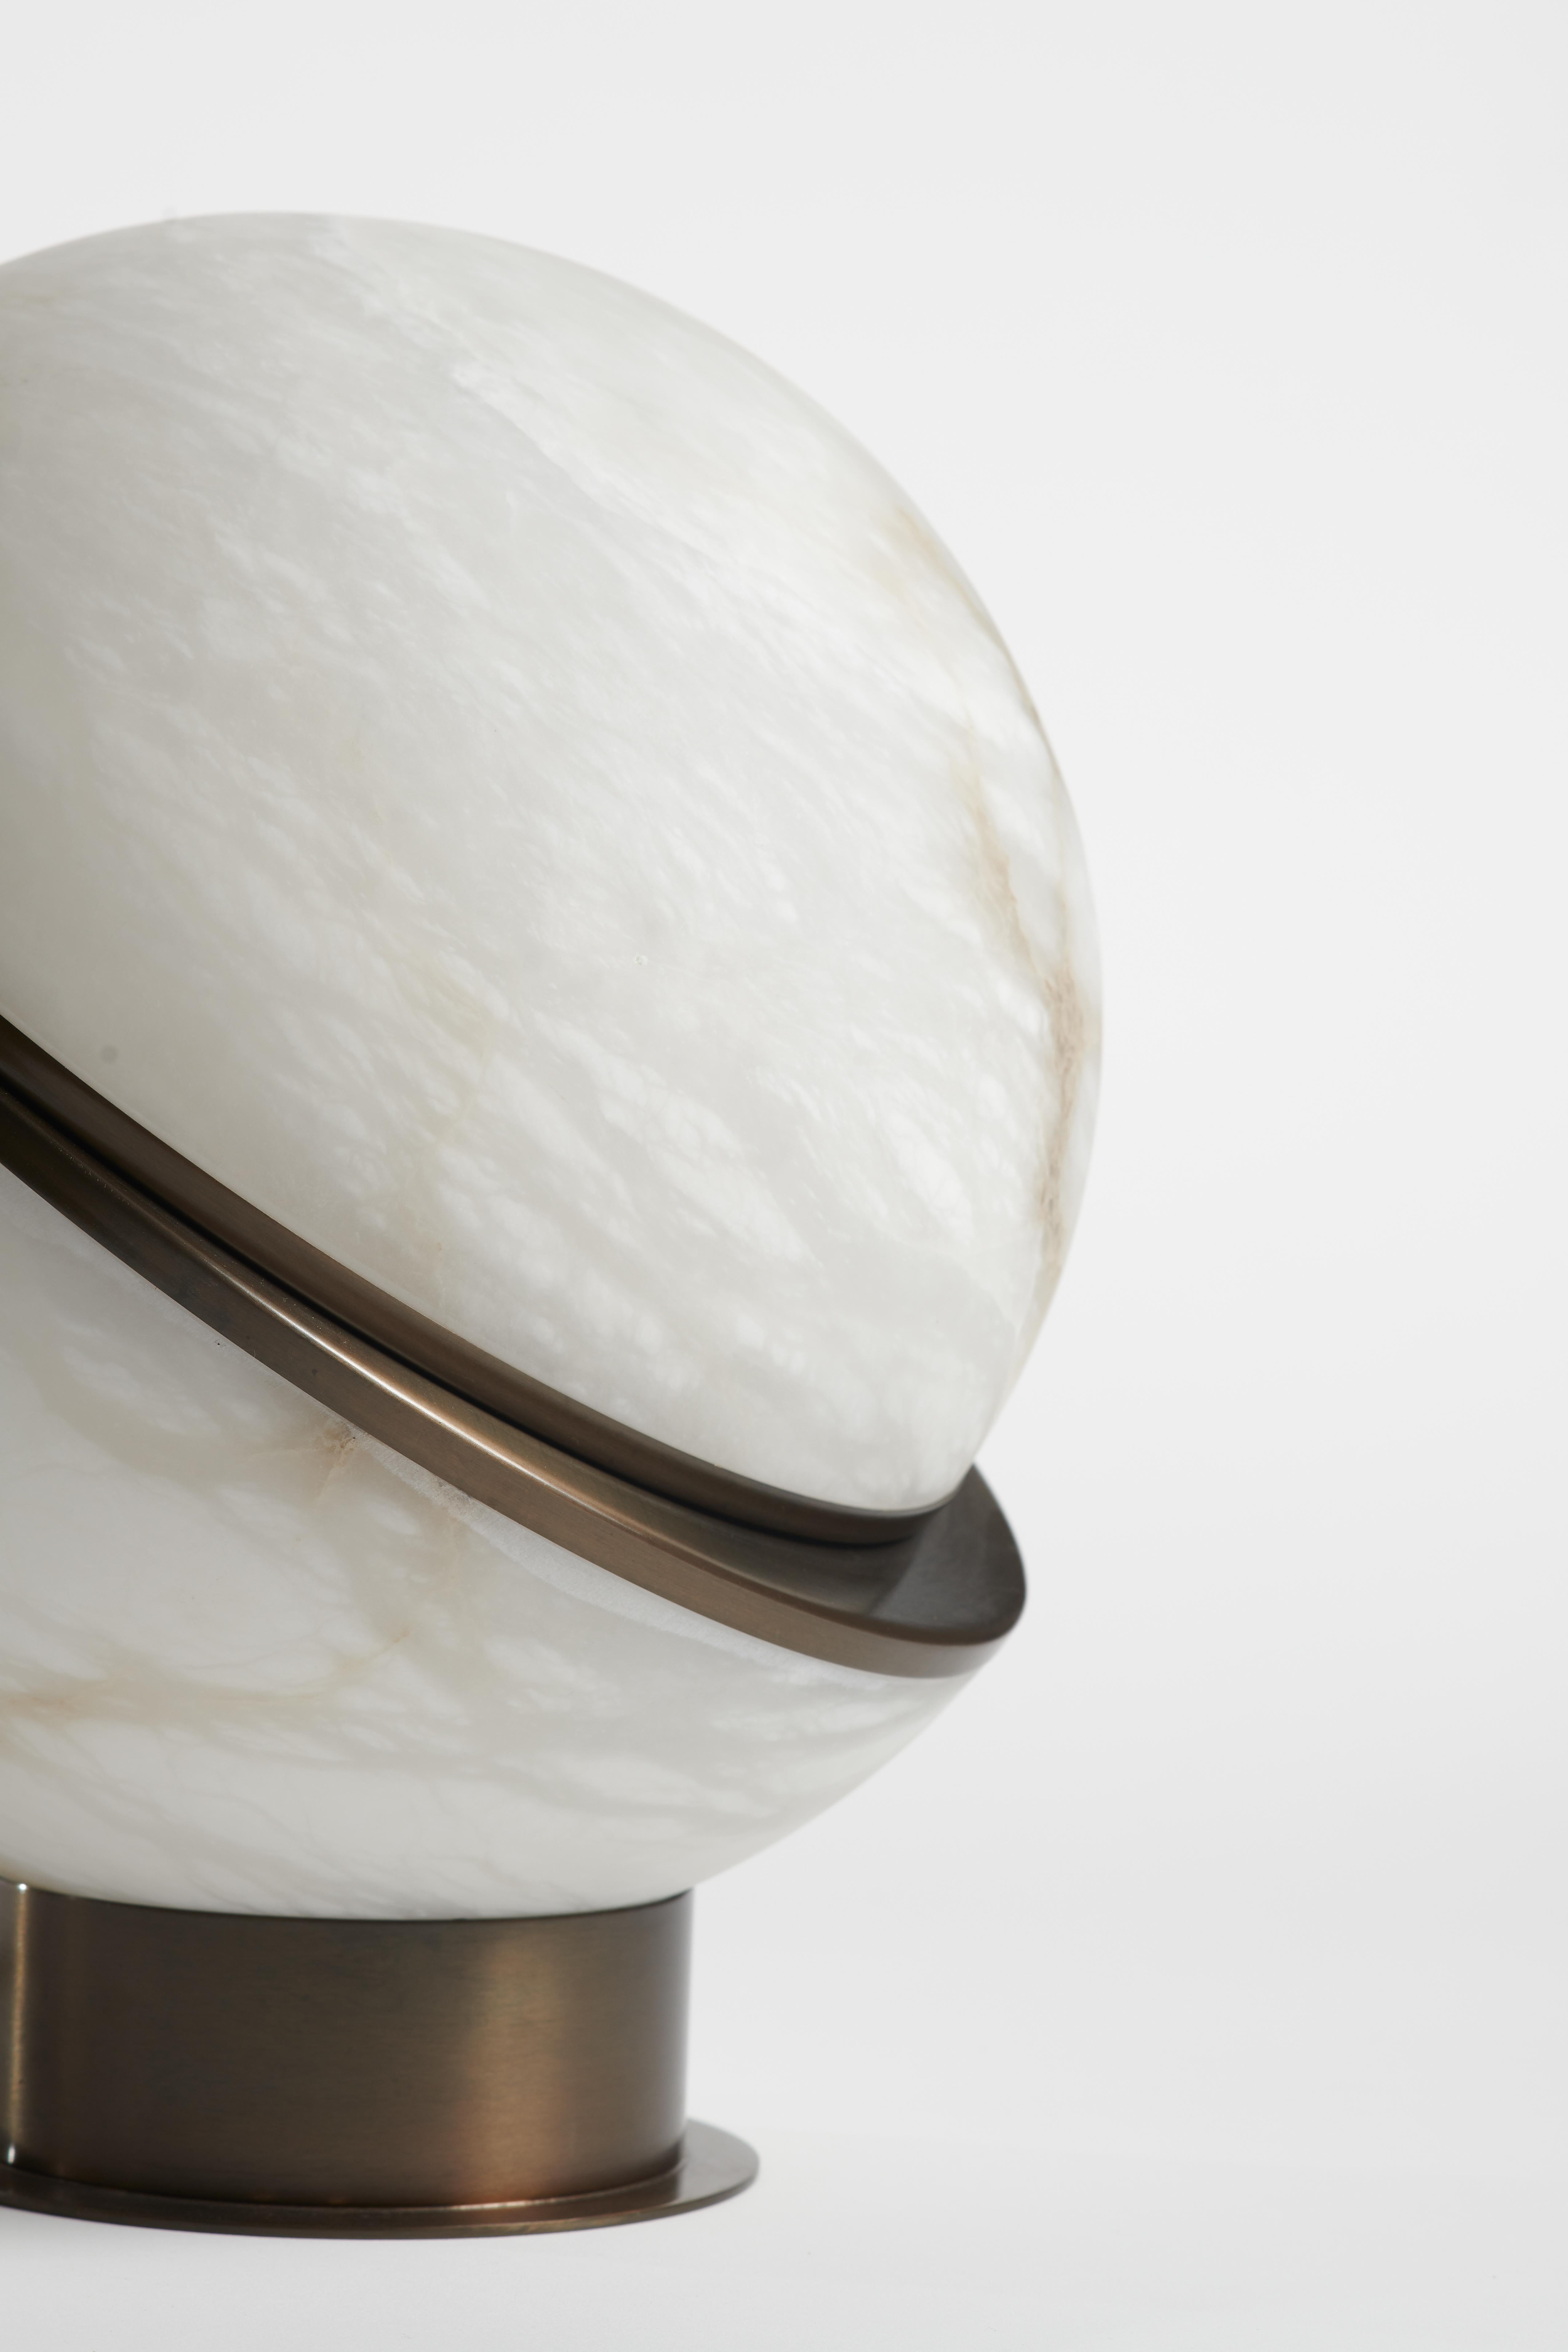 Modern Italian Ethereal Allure of Alabaster - Offset Globe Lamp in bronze In New Condition For Sale In Milano, IT